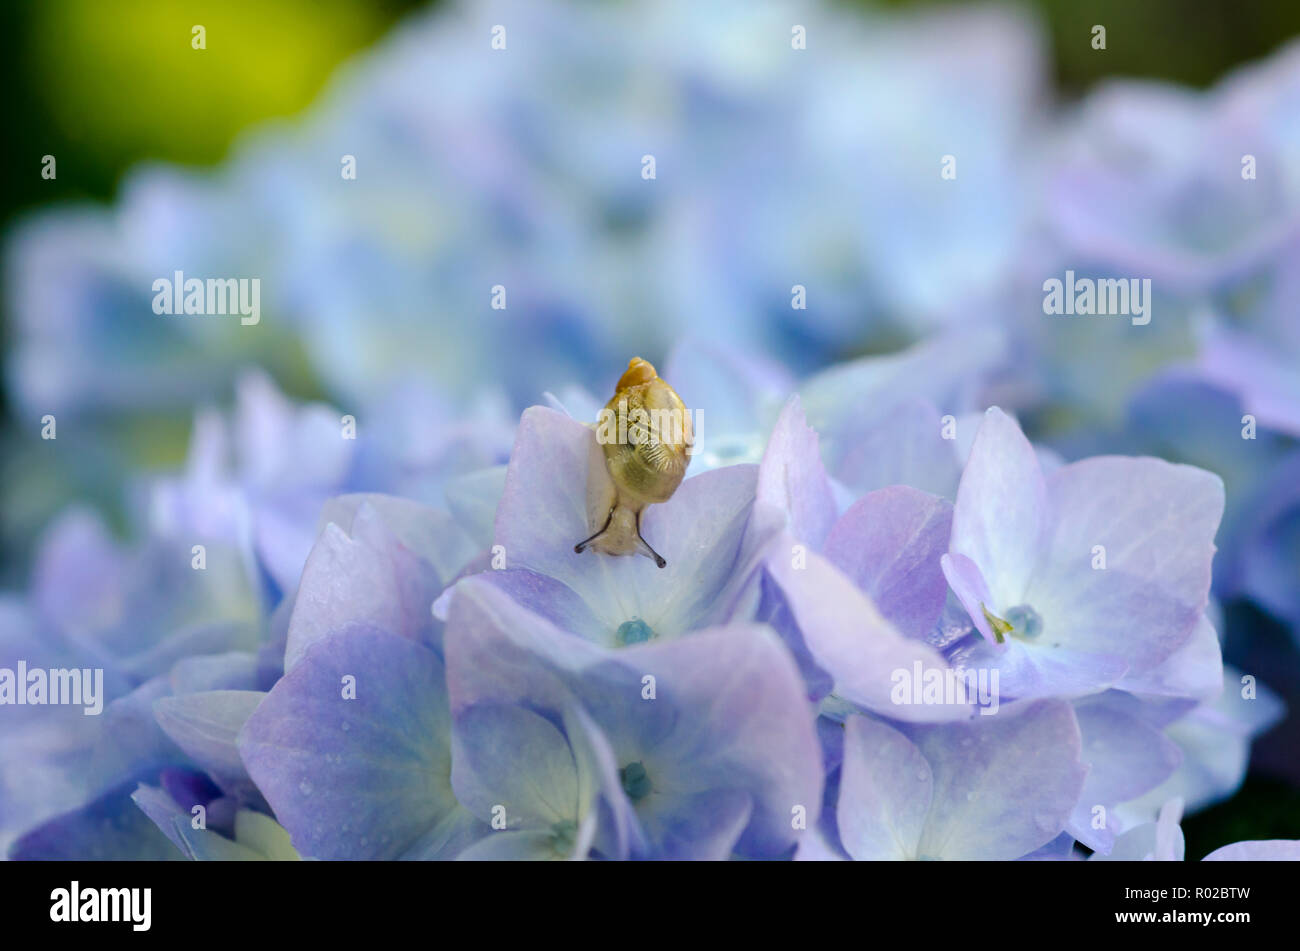 Closeup of a snail on hydrangea flowers with raindrops. Stock Photo